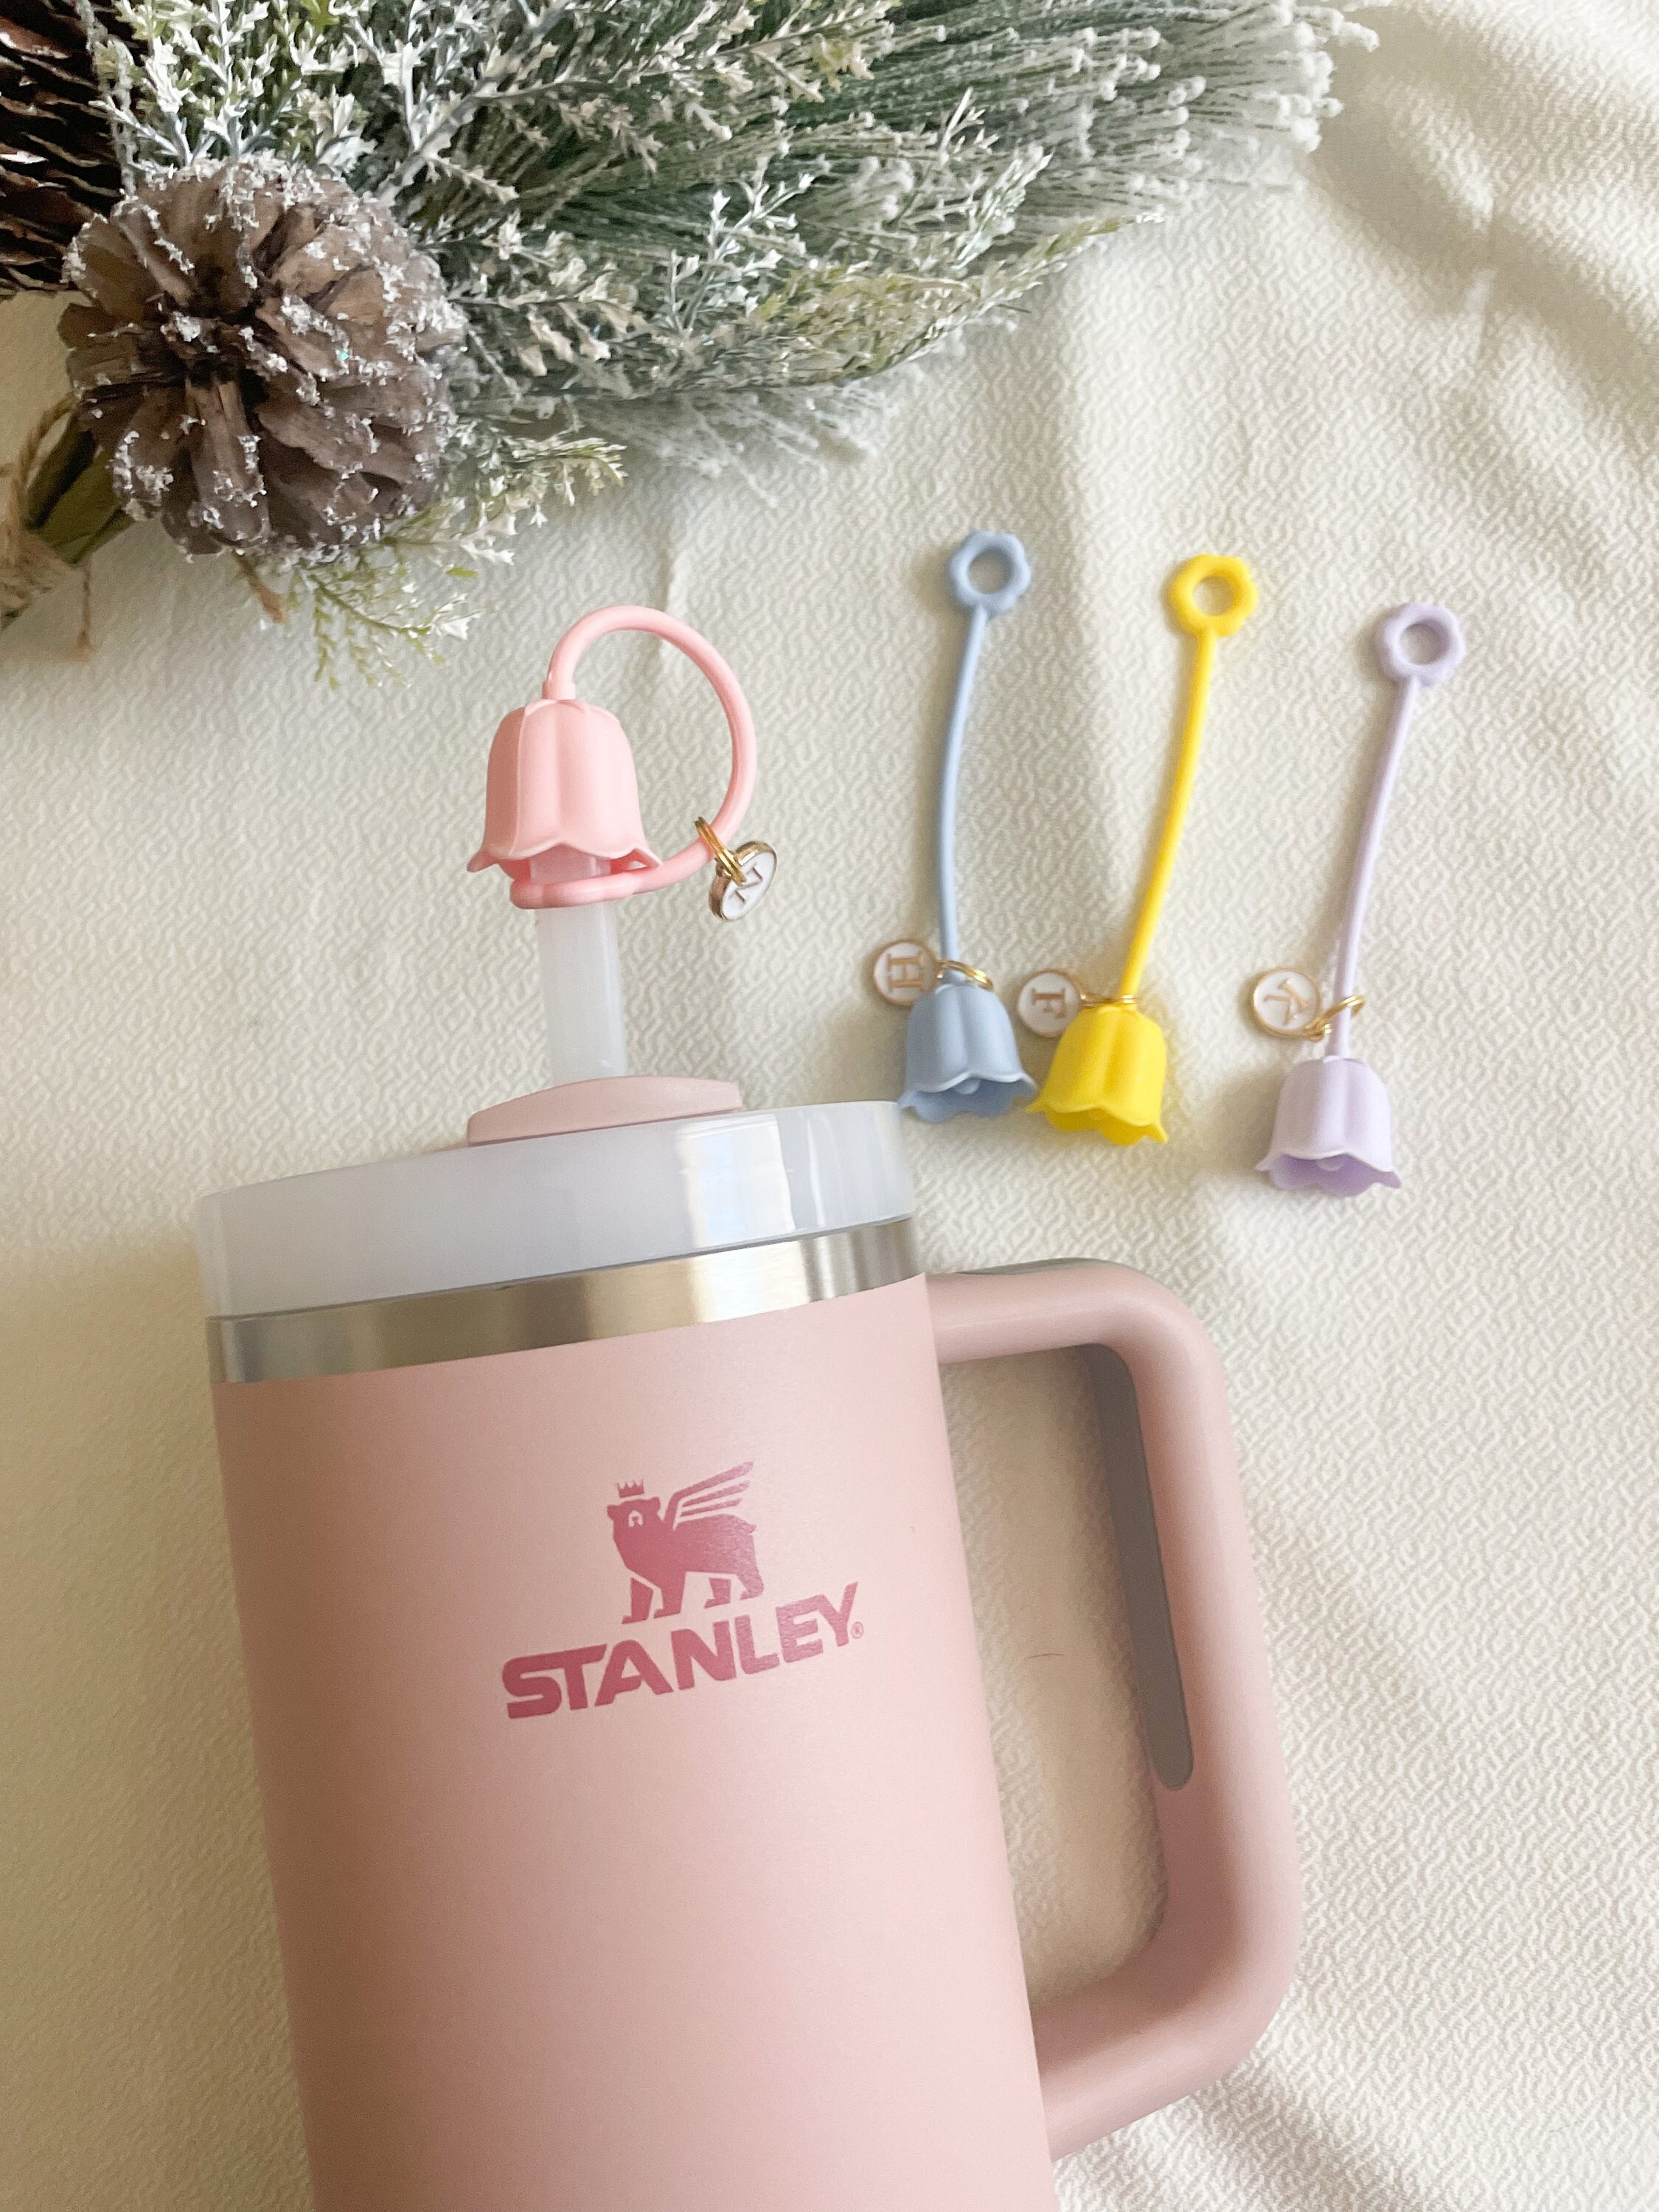 Stanley Accessory Straw Charm Stanley Straw Charms Flower Topper Drink Cup  Cover for Stanley Cup Bling Straw Cap Charm Straw Cover Jewelry 